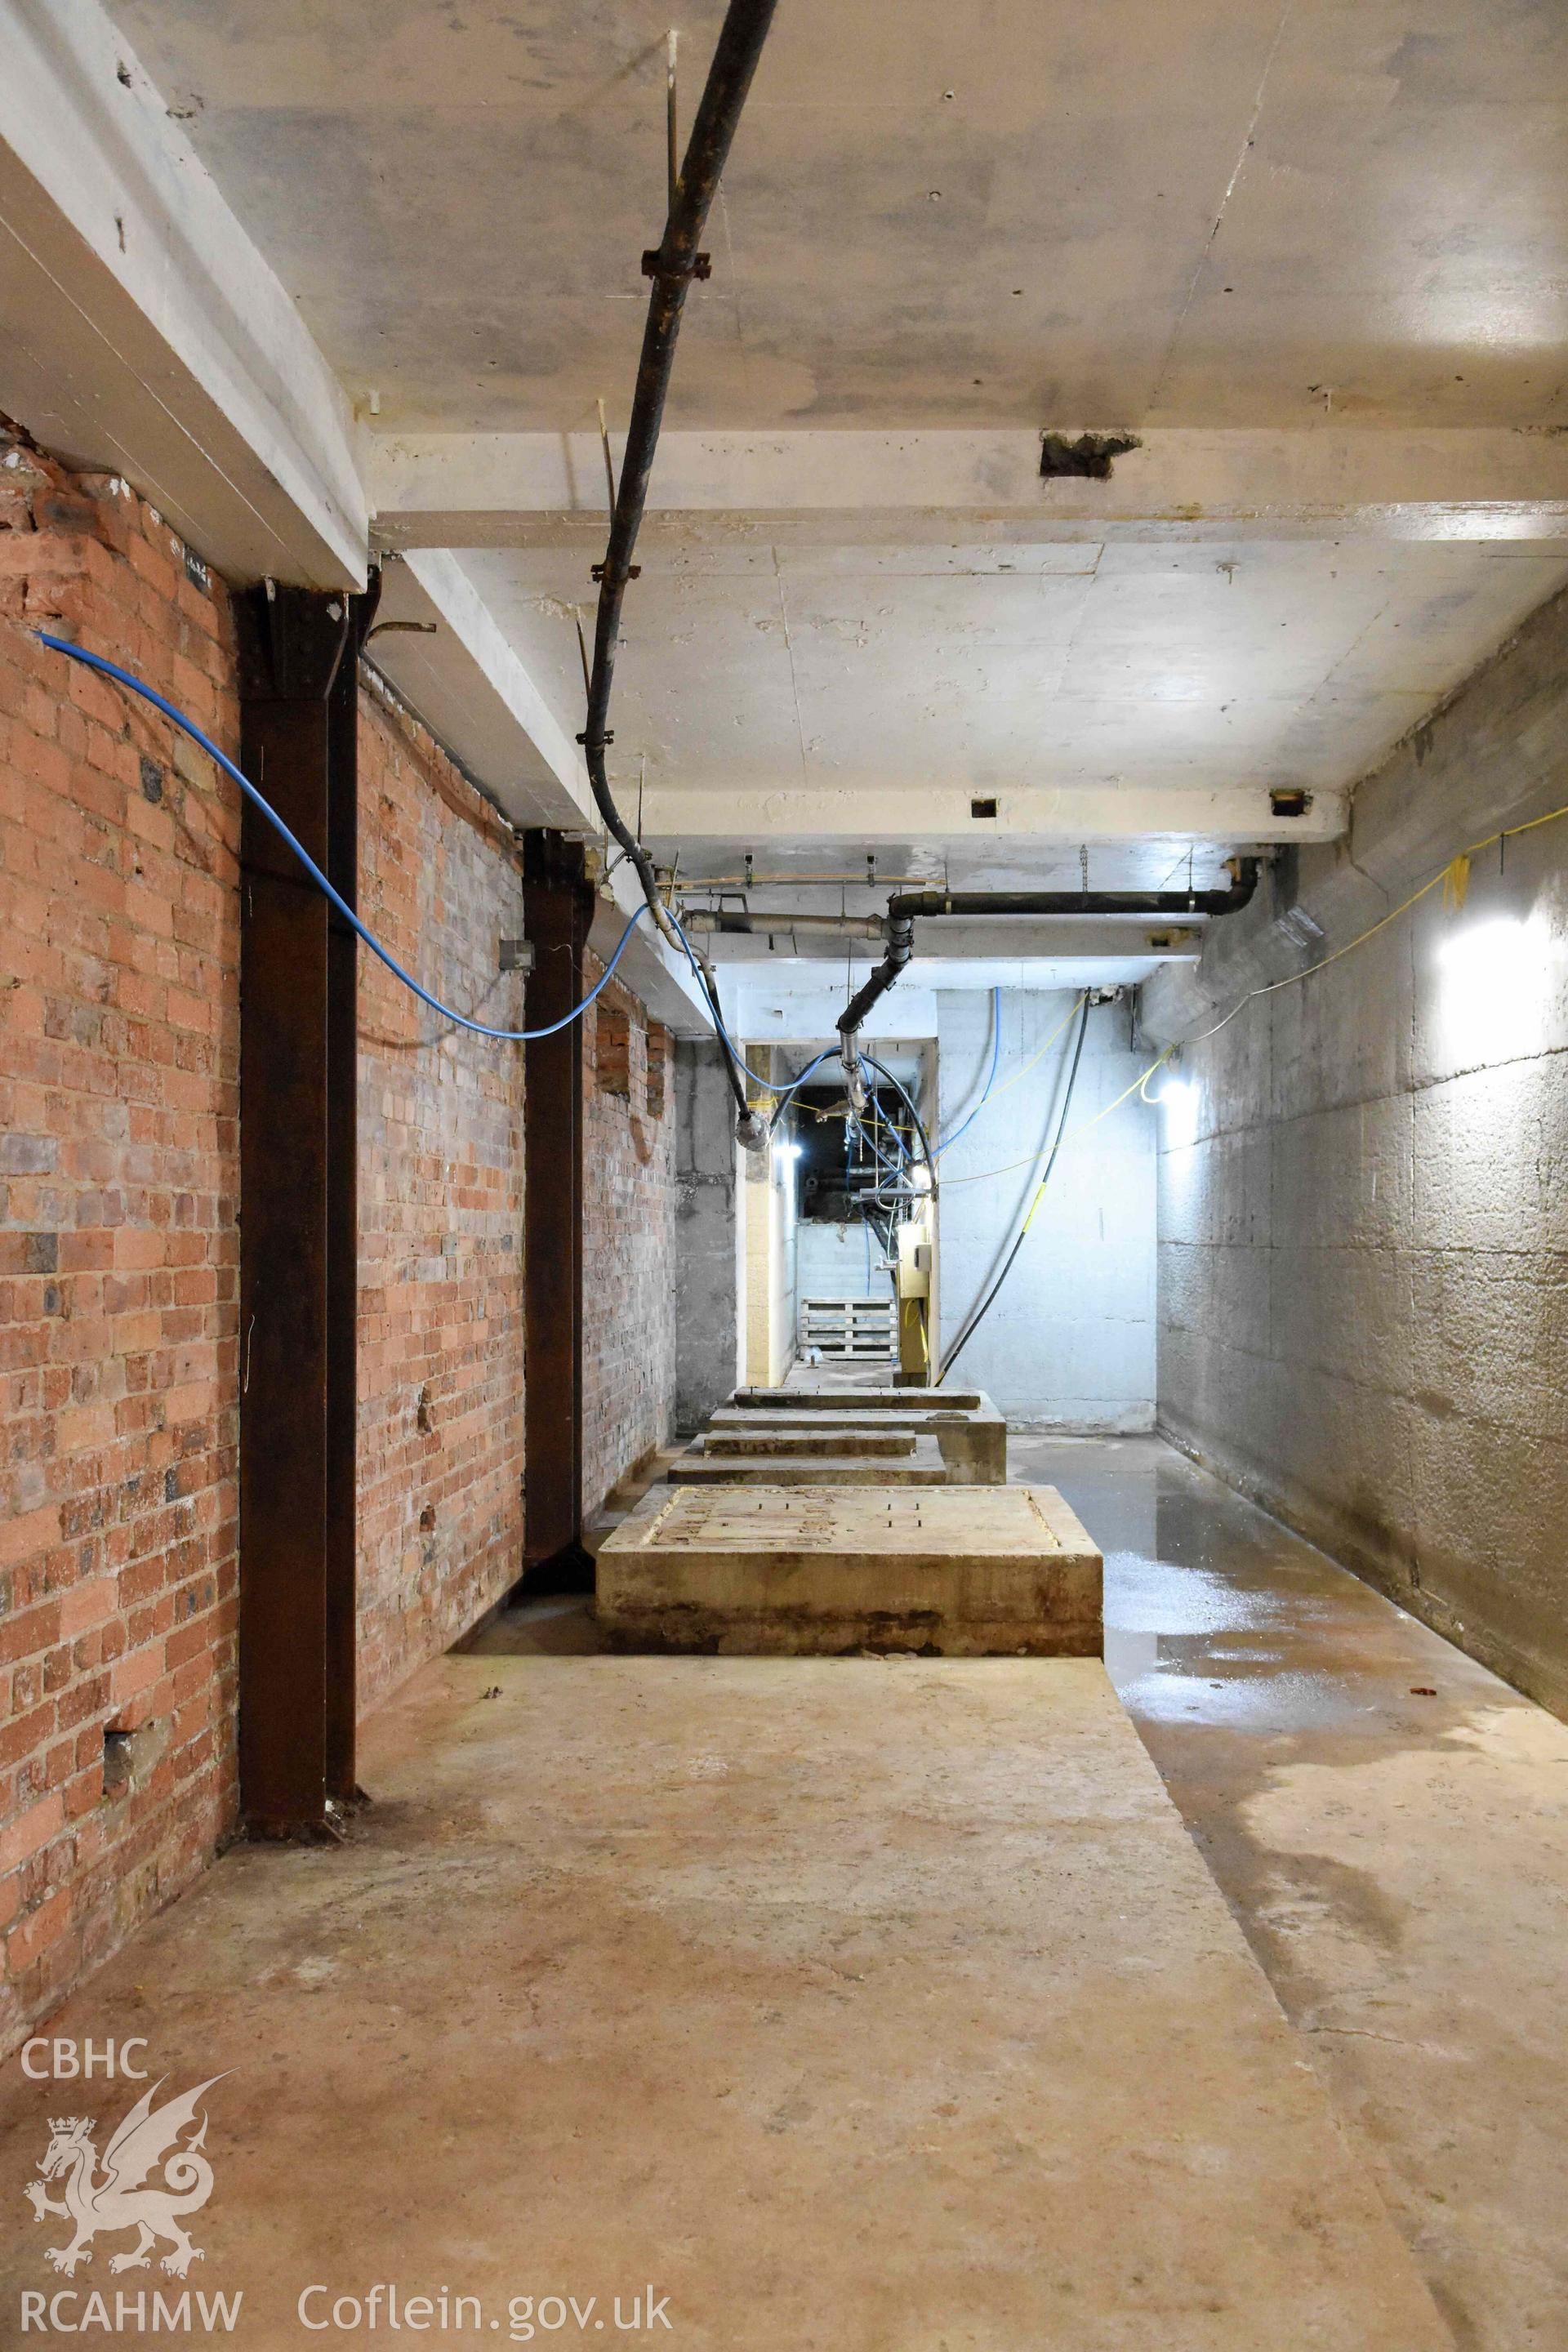 Basement room on south side of building looking north.